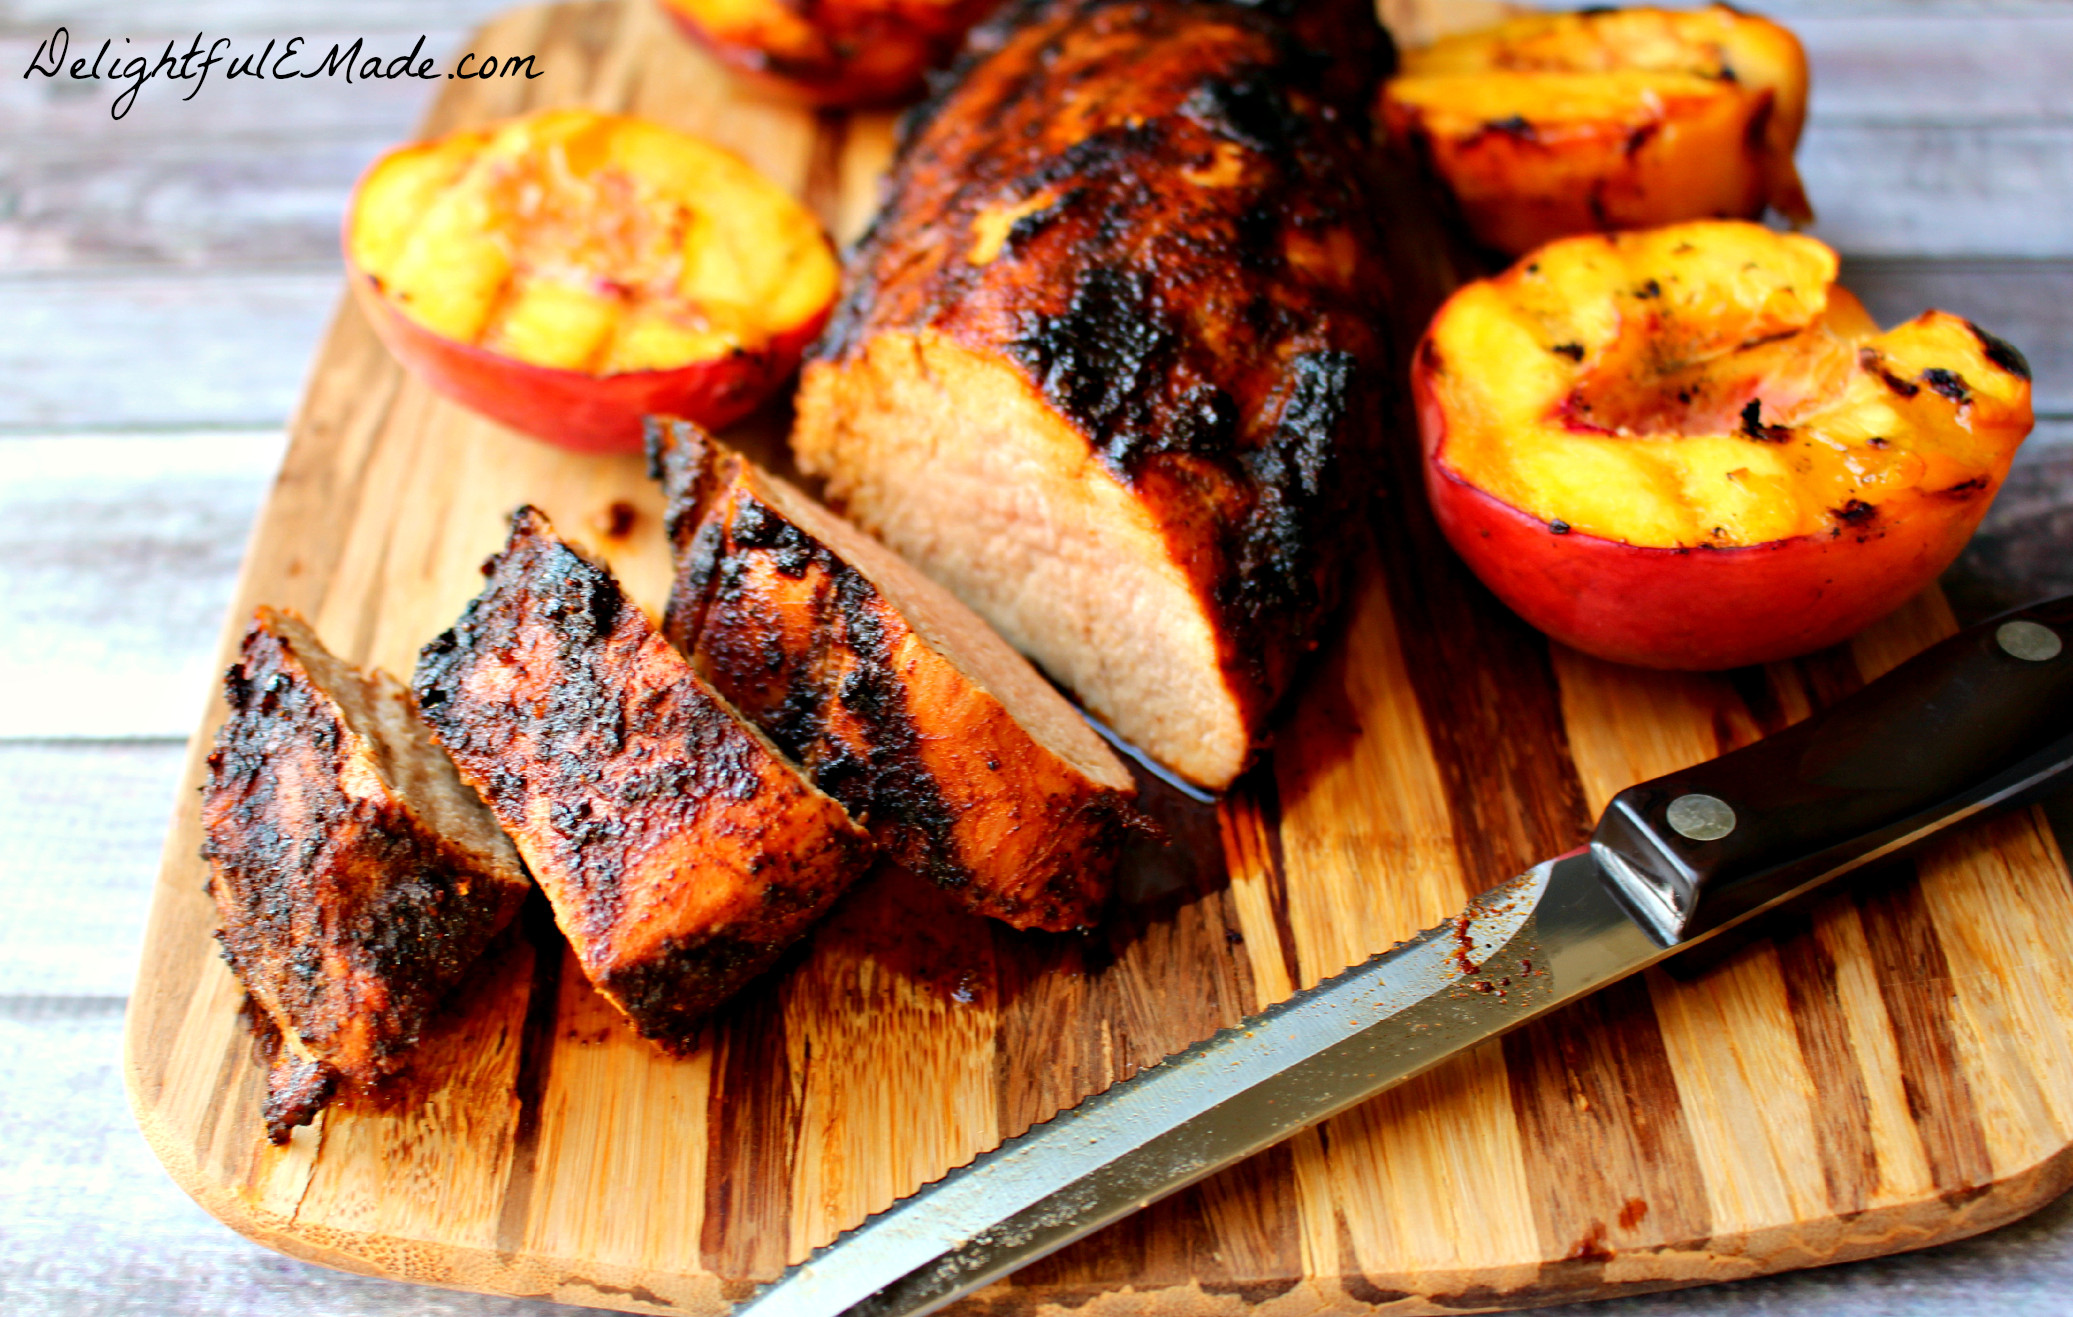 Pork Loin Grilled
 Easy Grilled Pork Loin with Sugar and Spice Rub and